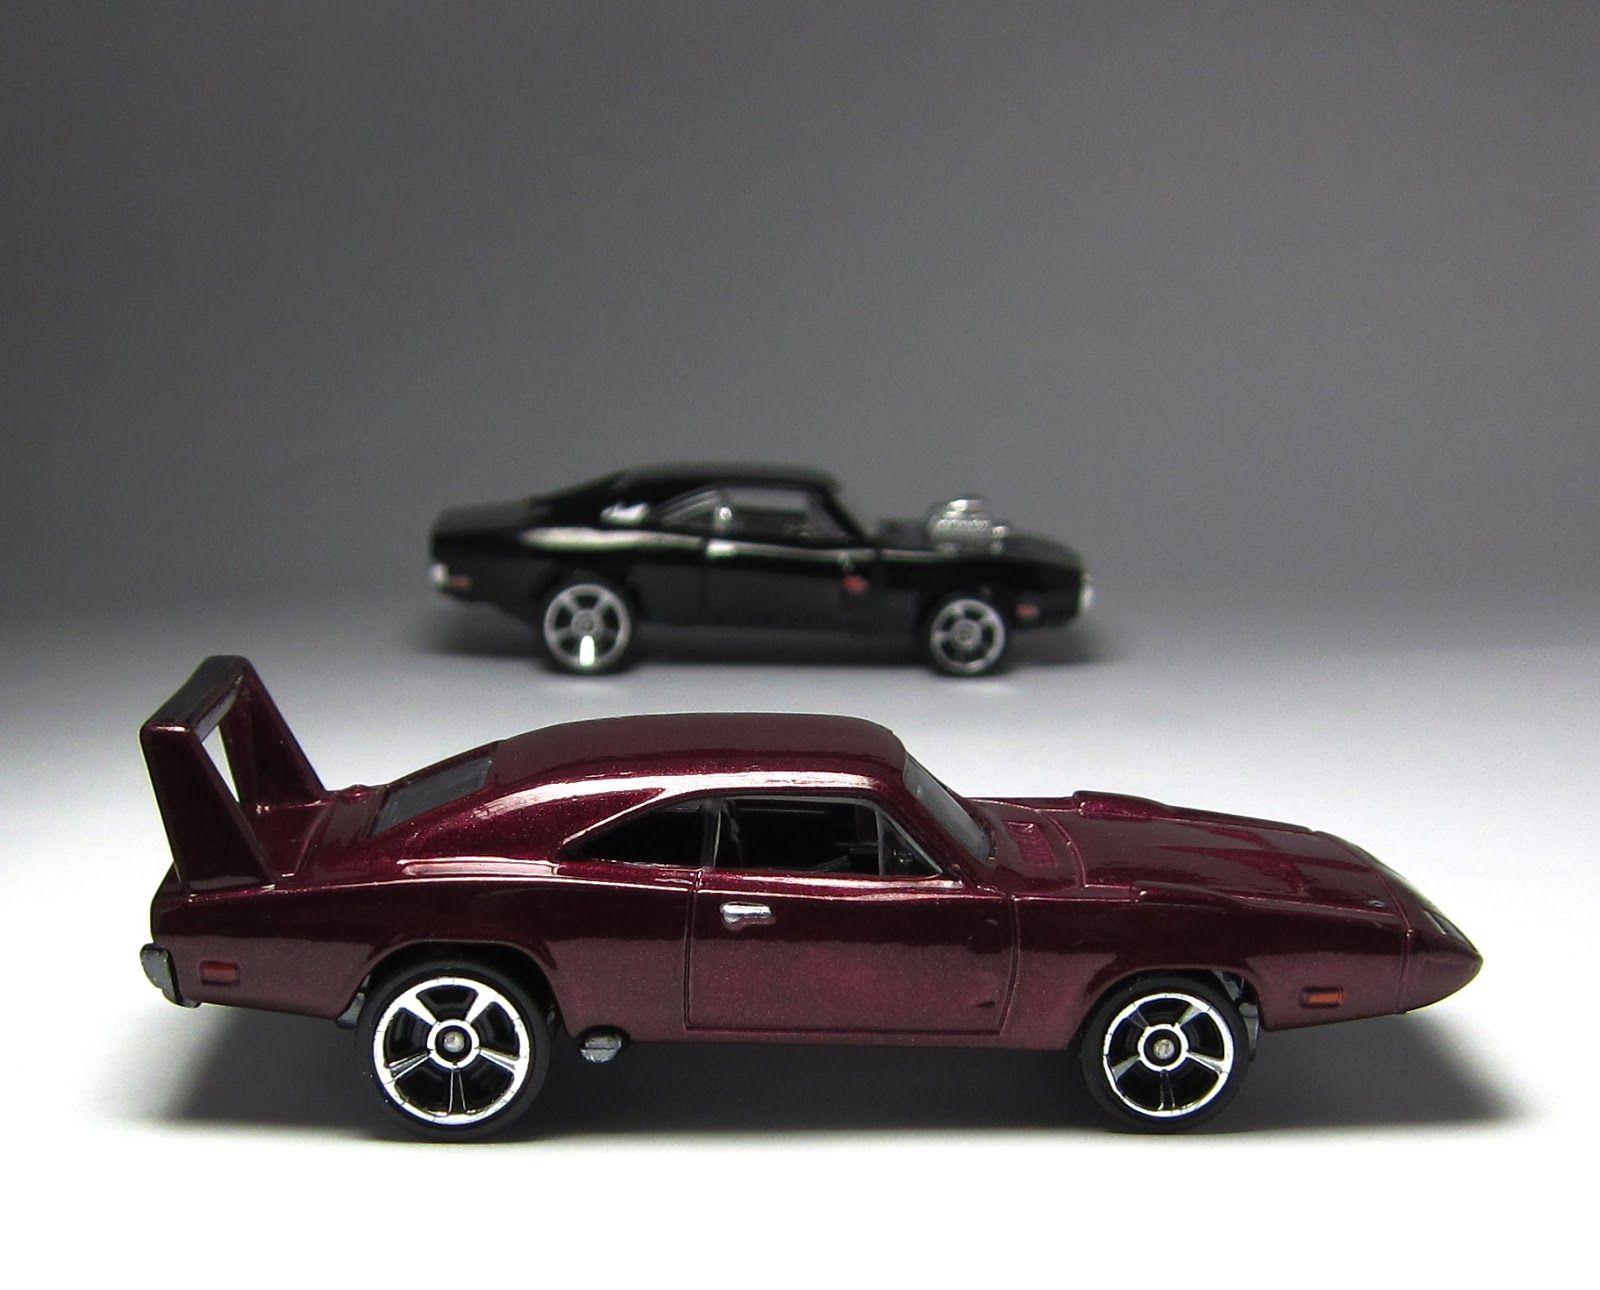 Dodge Charger Daytona Fast Furious 6 muscle classic hot rod